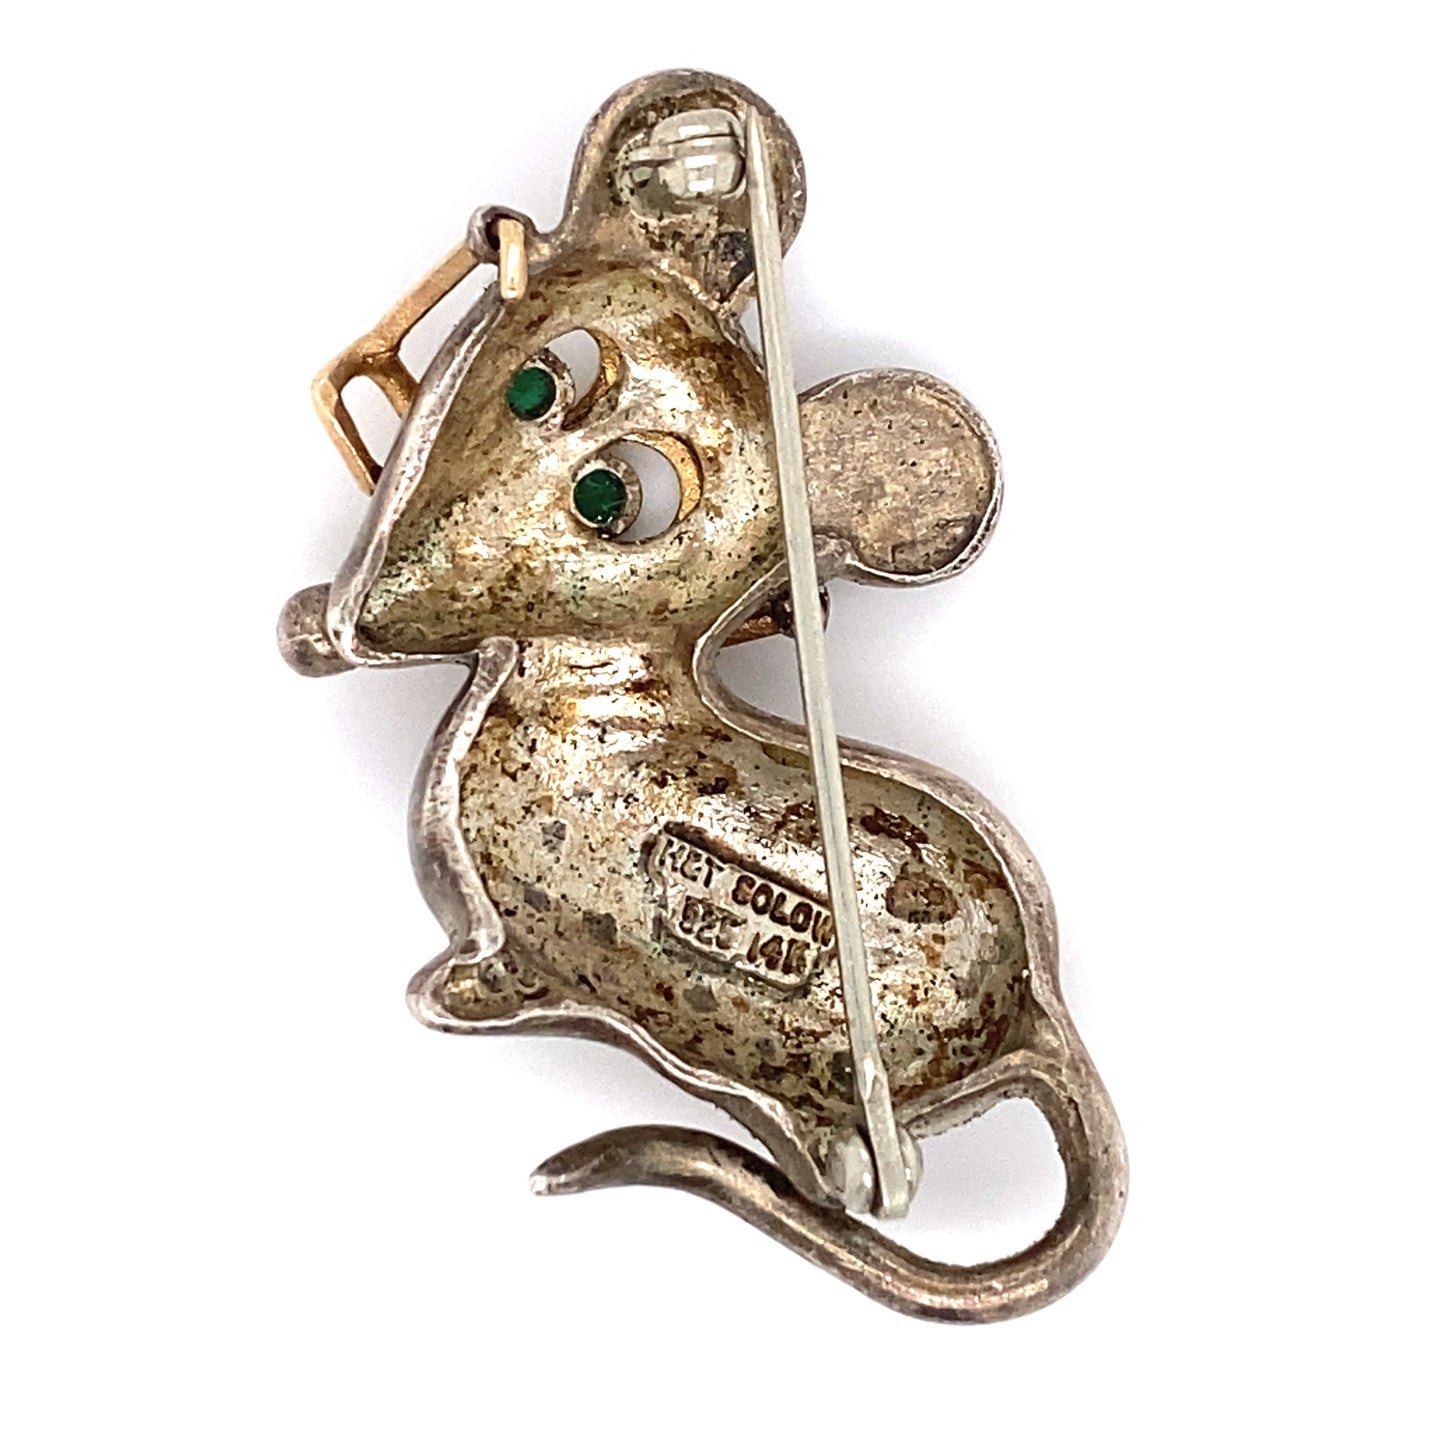 Circa 1950s Mouse Brooch with Green Glass Eyes in Sterling Silver and 14K Gold